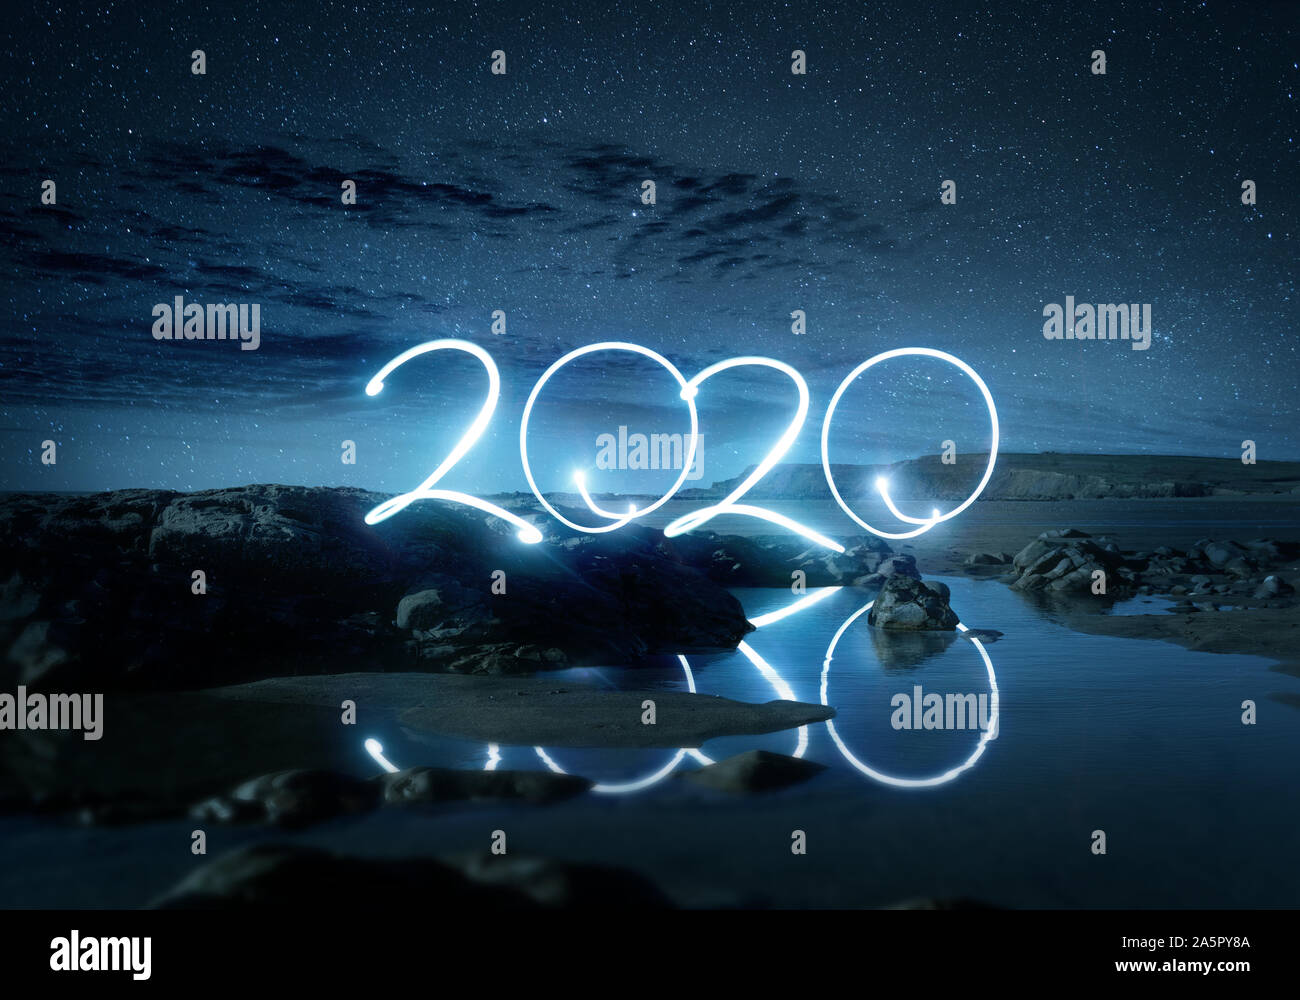 Night time 2020 light effect writing reflecting in water on a beach. Long exposure Landscape new year photo composite. Stock Photo